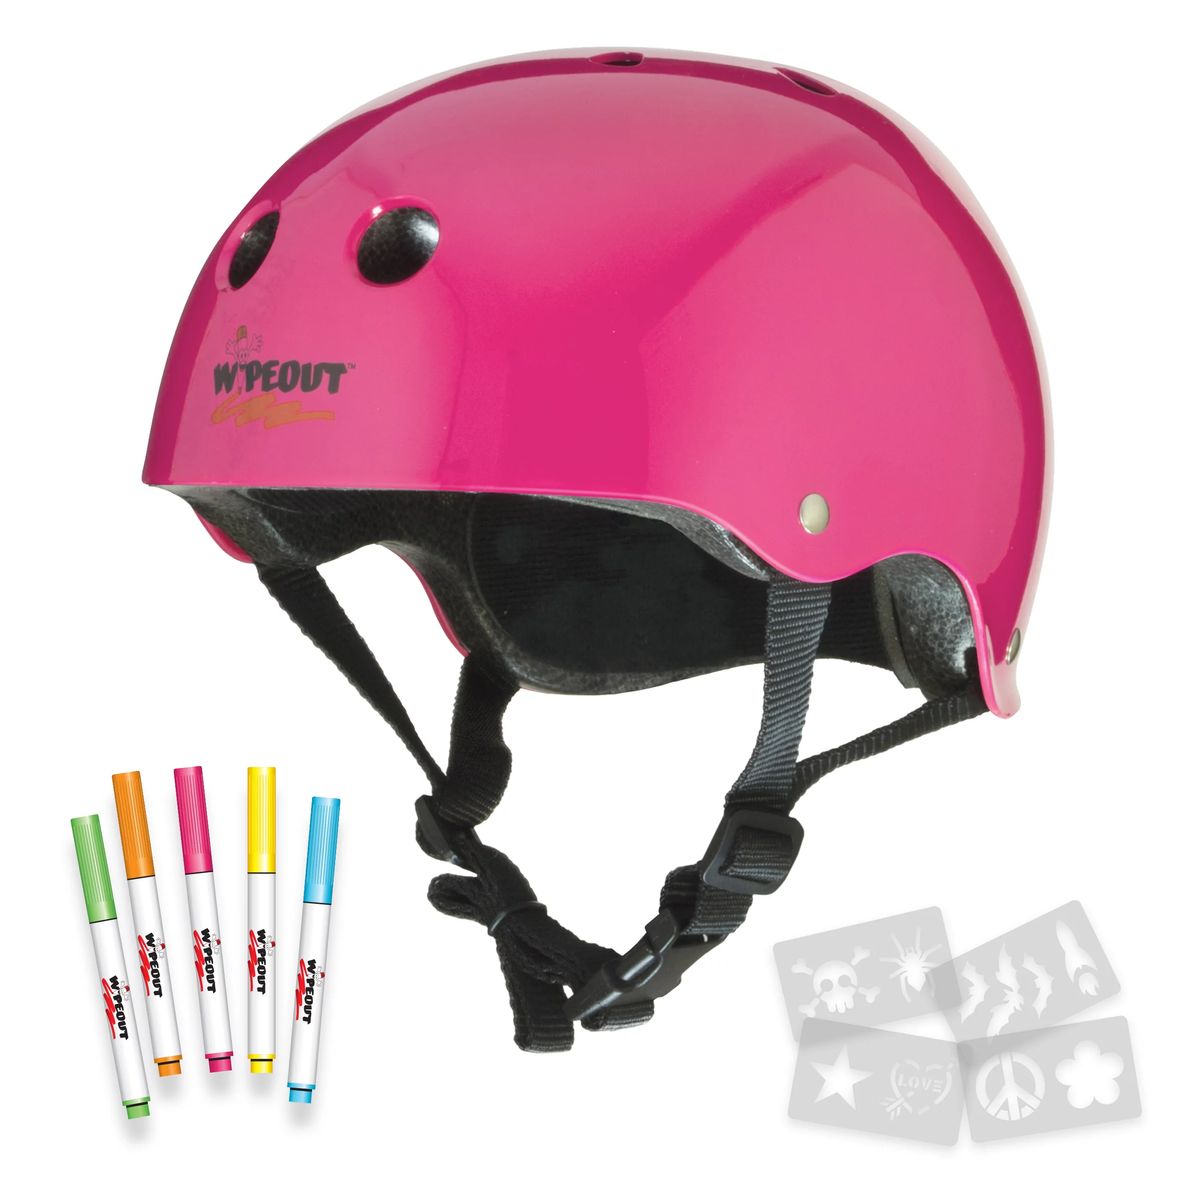 [RDY] [送料無料] Wipeout Dry Erase Kids Helmet for Bike, Skate, and Scooter, Neon Pink, Ages 5+ ..